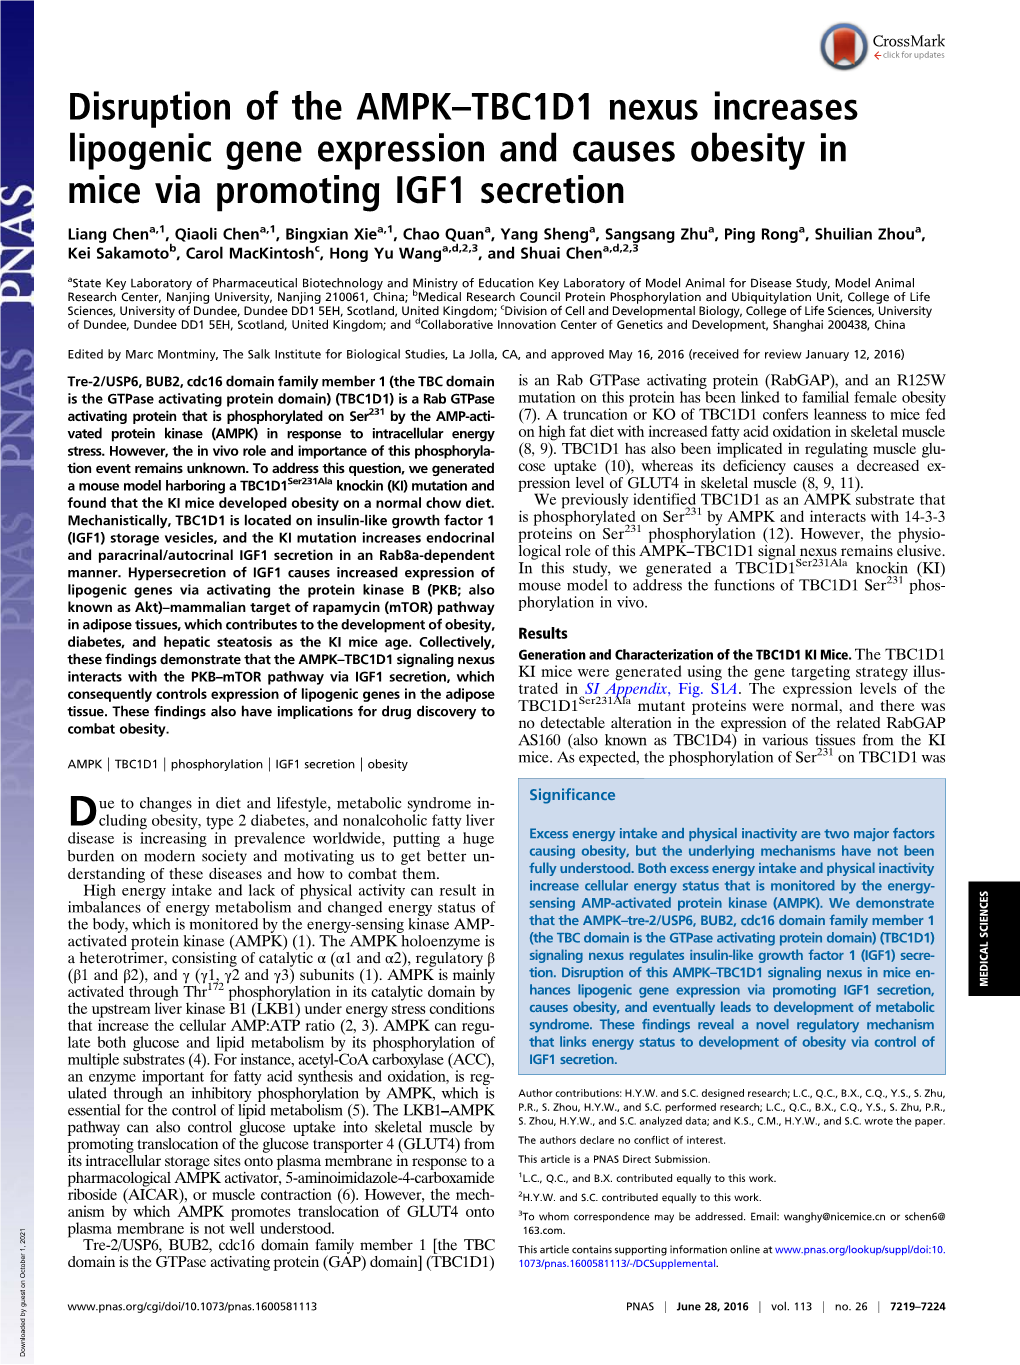 Disruption of the AMPK–TBC1D1 Nexus Increases Lipogenic Gene Expression and Causes Obesity in Mice Via Promoting IGF1 Secretion